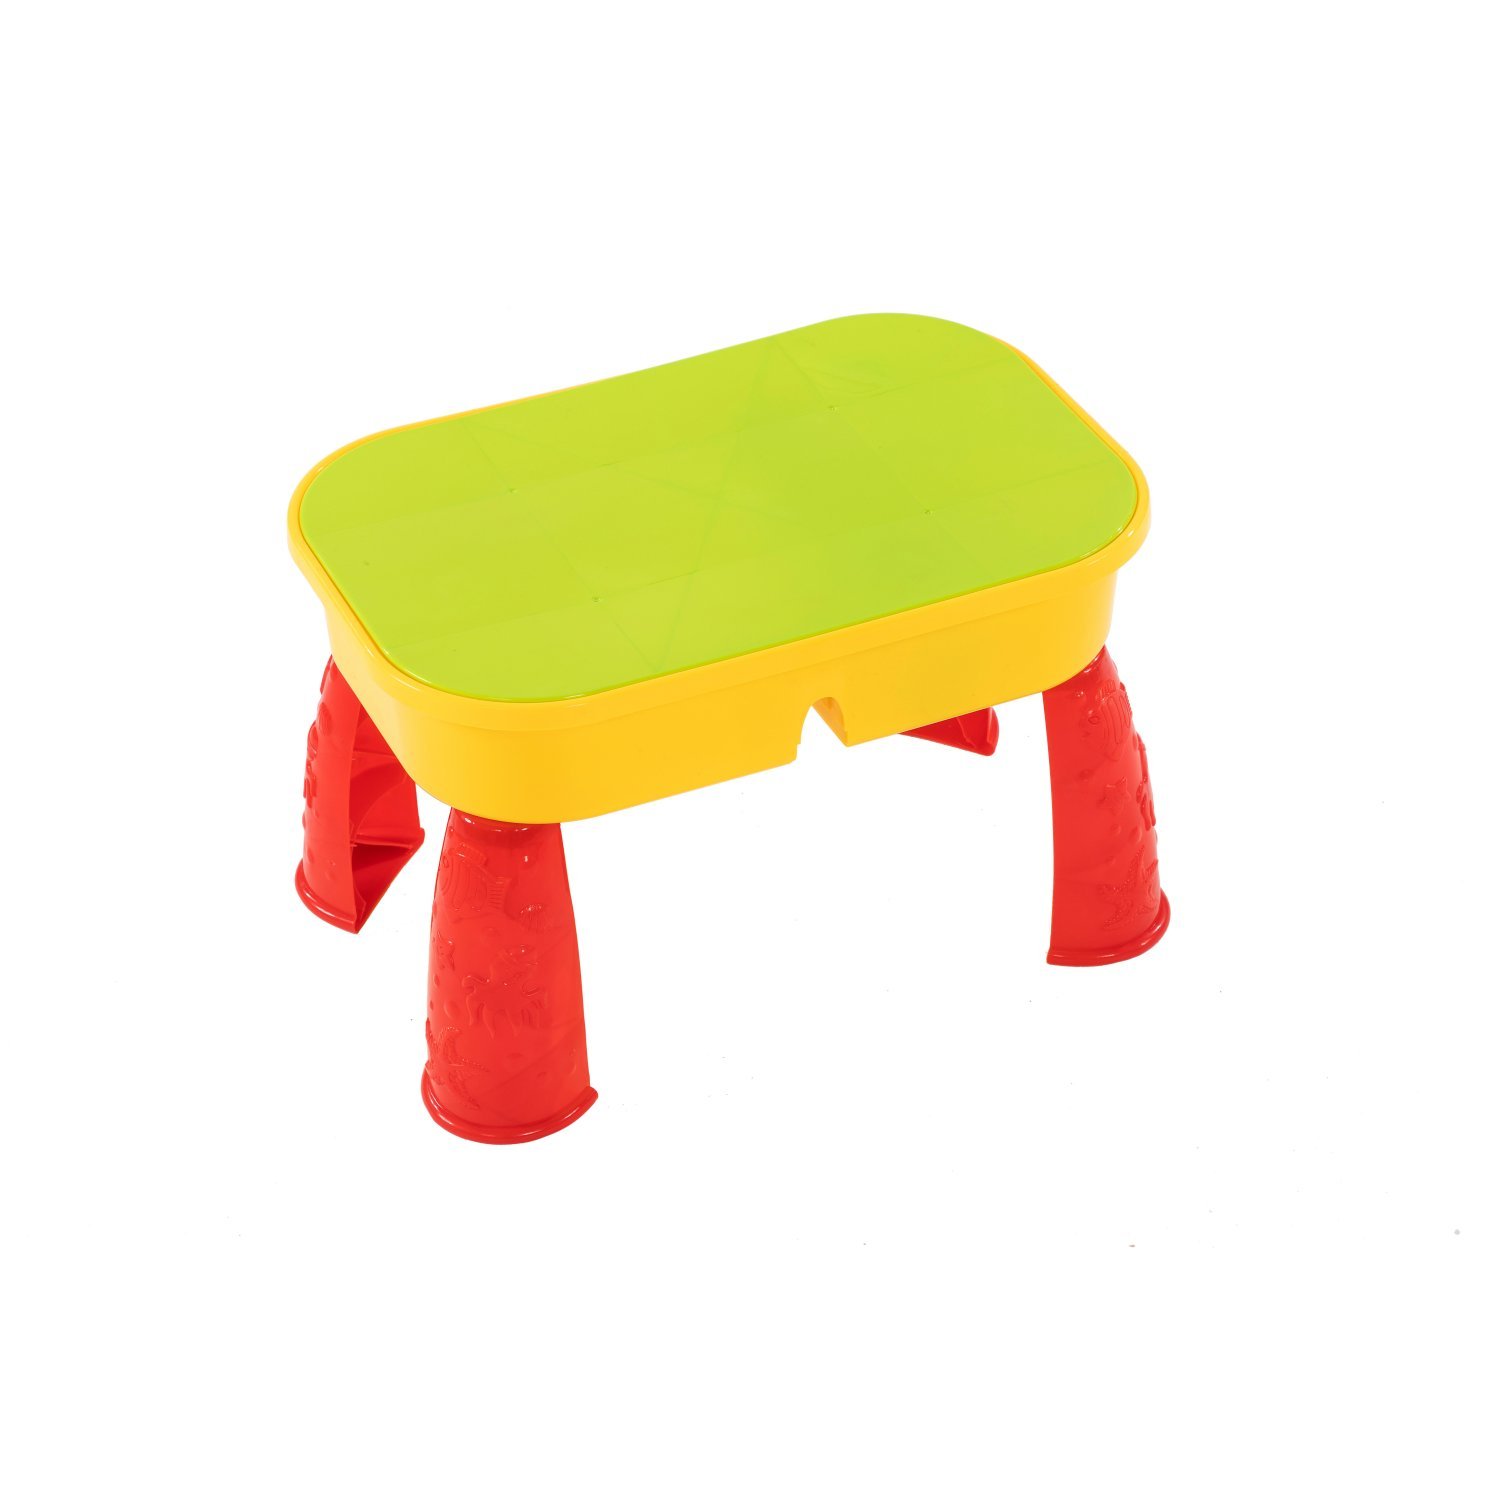 Beach Sandpit Table Water Outdoor Garden Play Spade Tool Toy Sand and Water Play Table Sand Pit Beach Toy Set Kids Sand Pit Set YLLQXI Kids Outdoor Play Garden Sandpit 